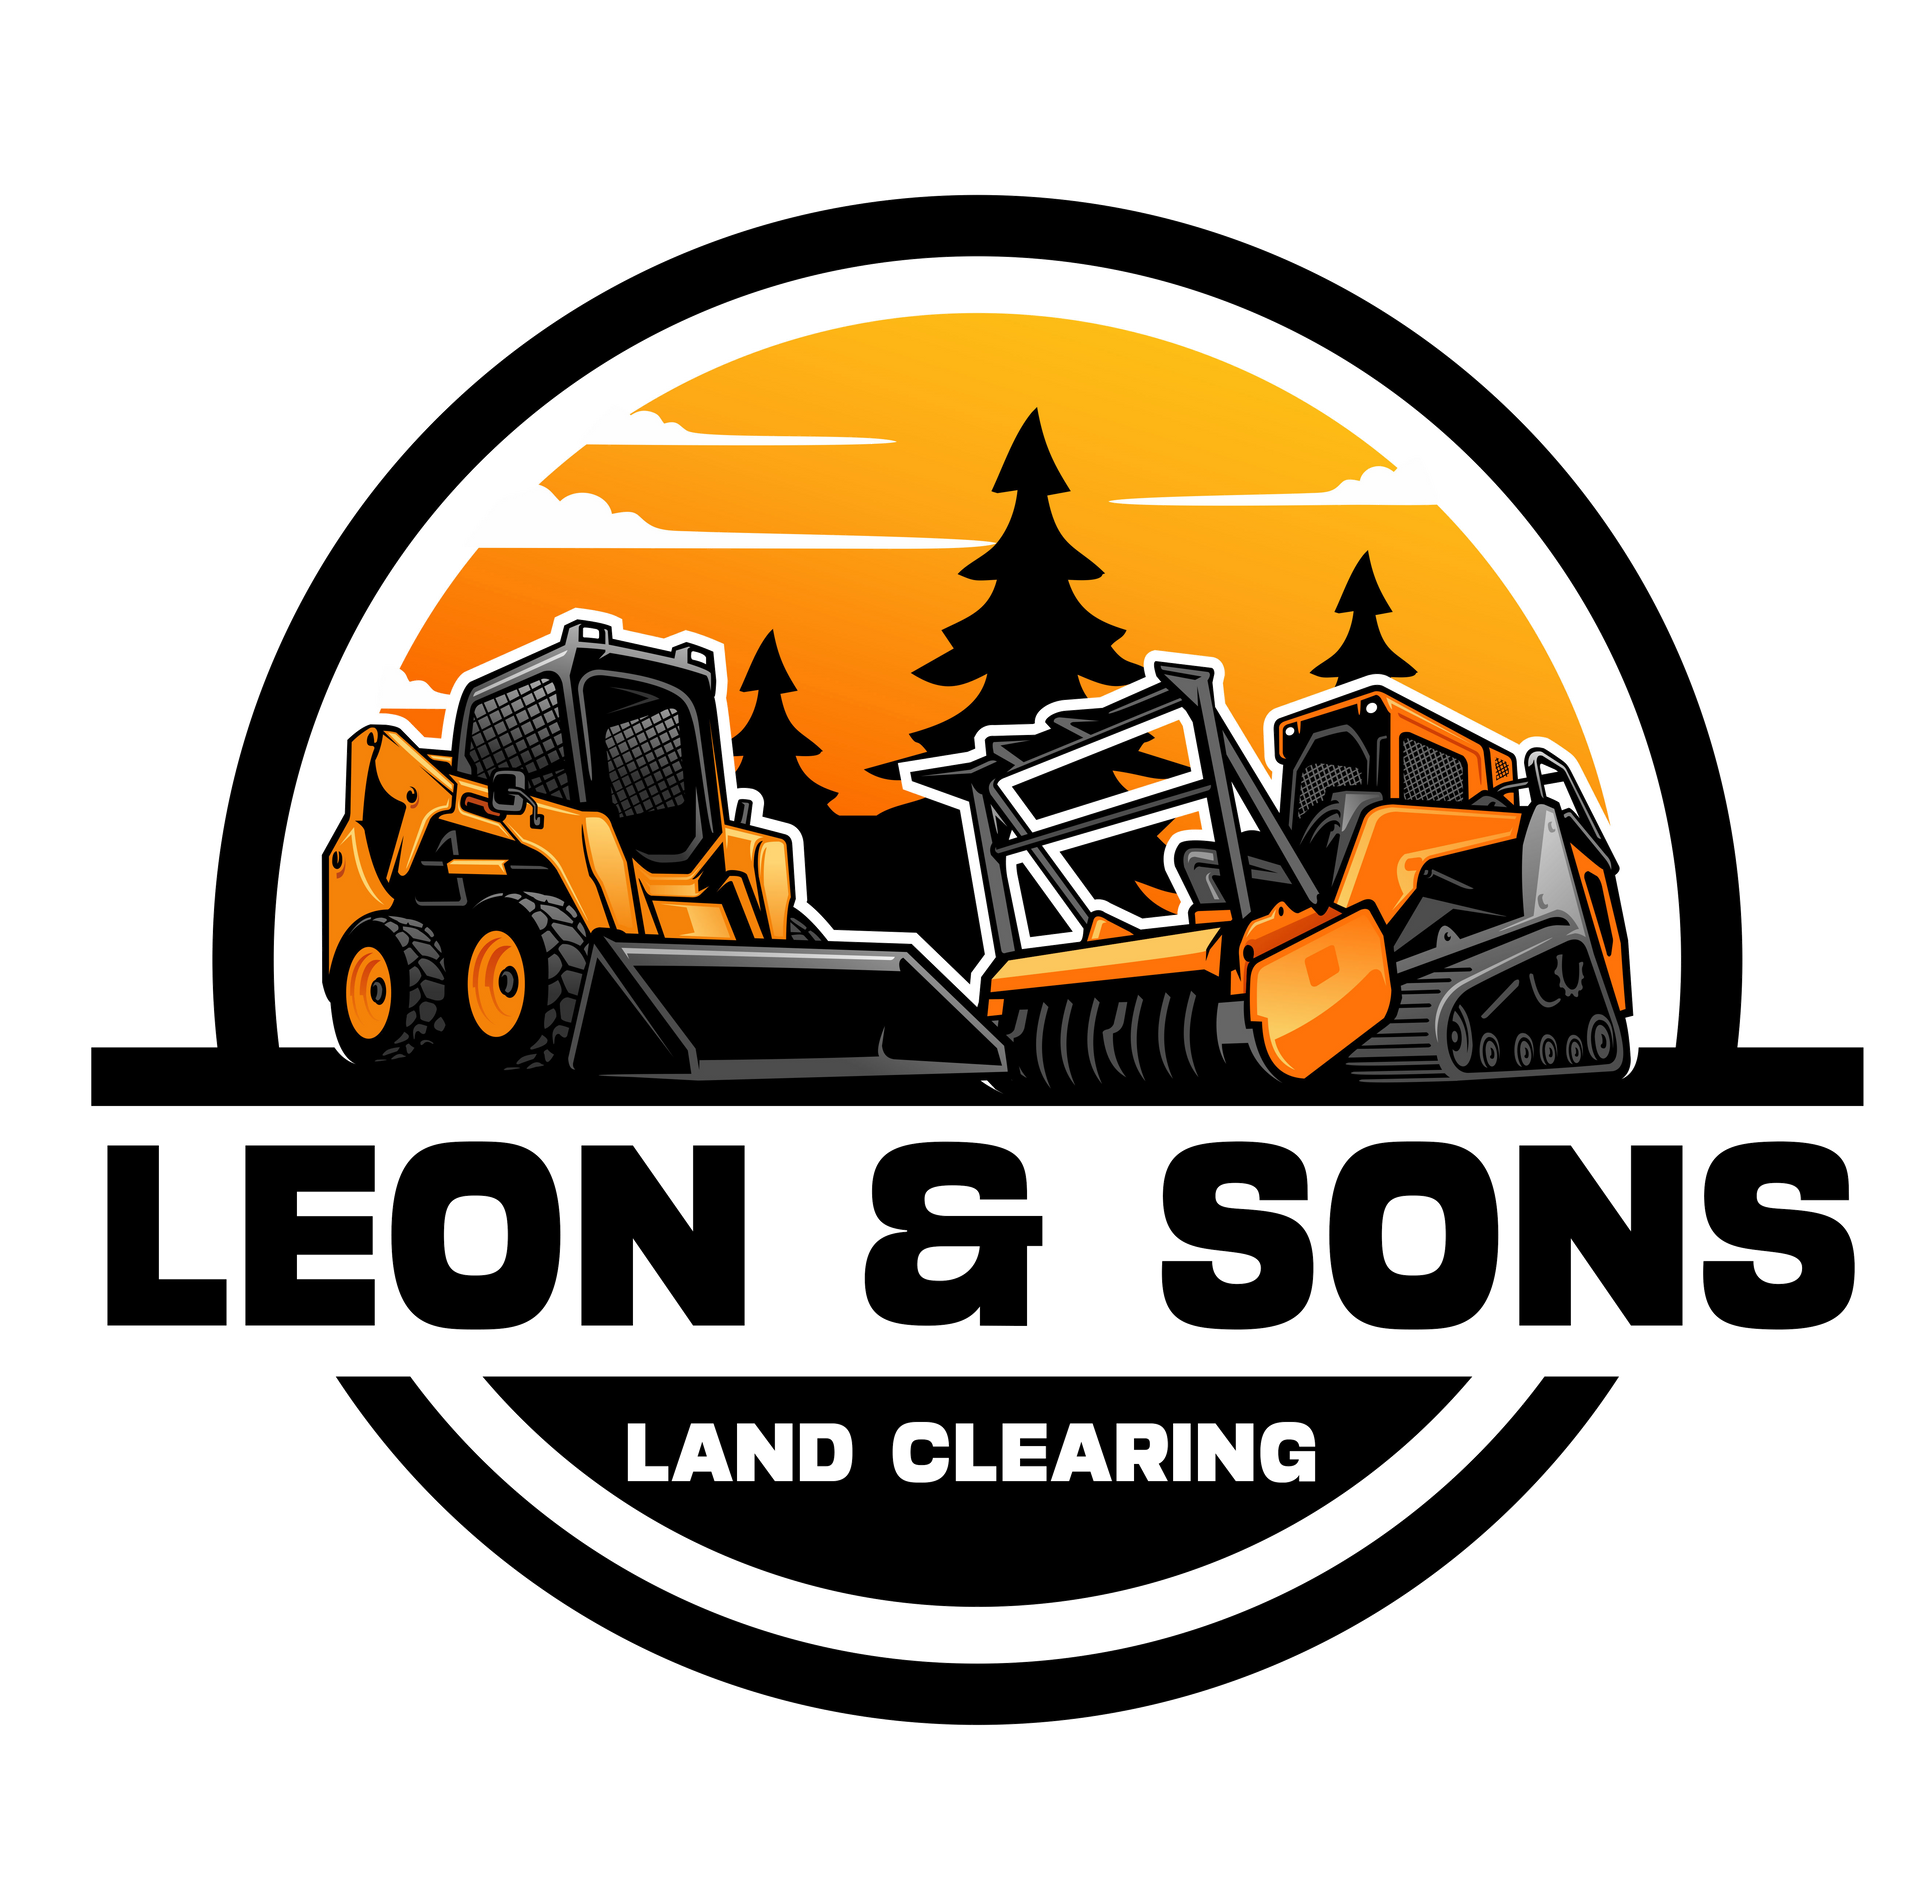 Leon and Sons logo 